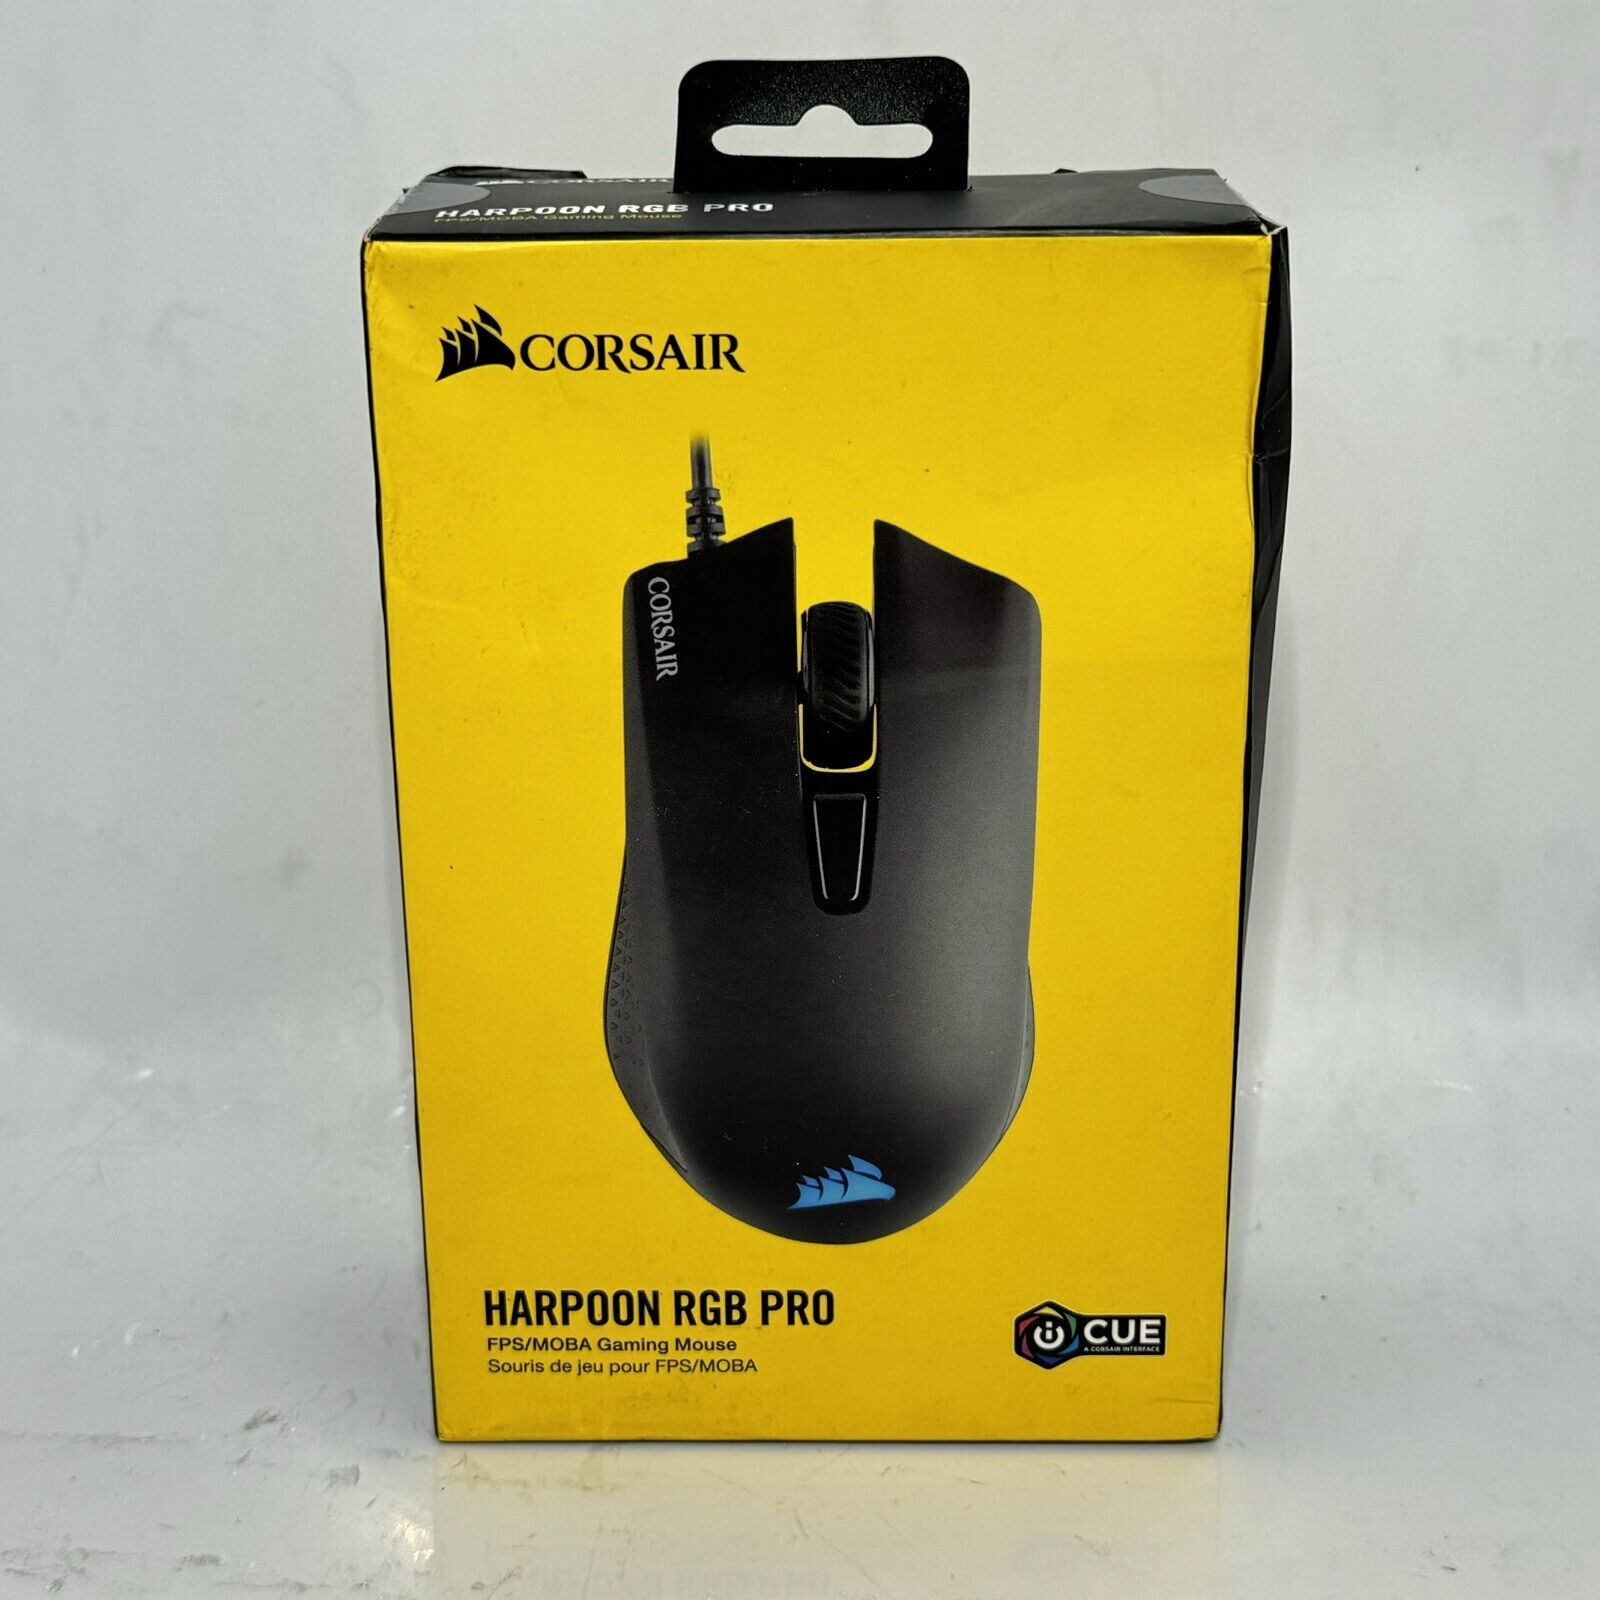 NEW Corsair Harpoon RGB PRO NEW (CH-9301111-NA) Wired Gaming Mouse 12000 DPI